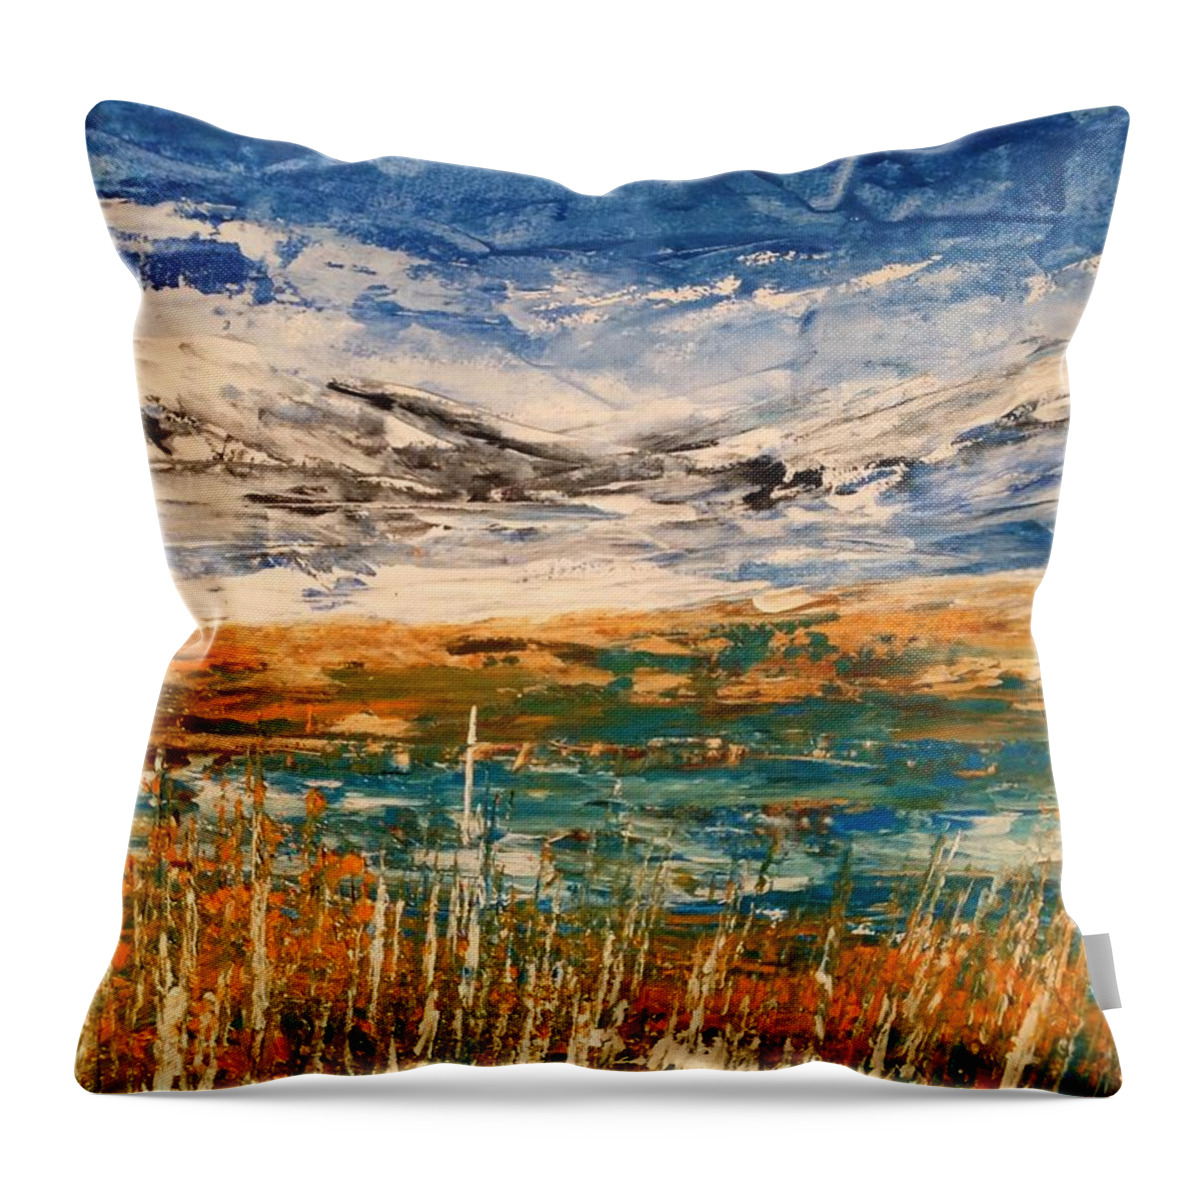 Abstract Landscape Painting Throw Pillow featuring the painting Banff Marsh by Desmond Raymond